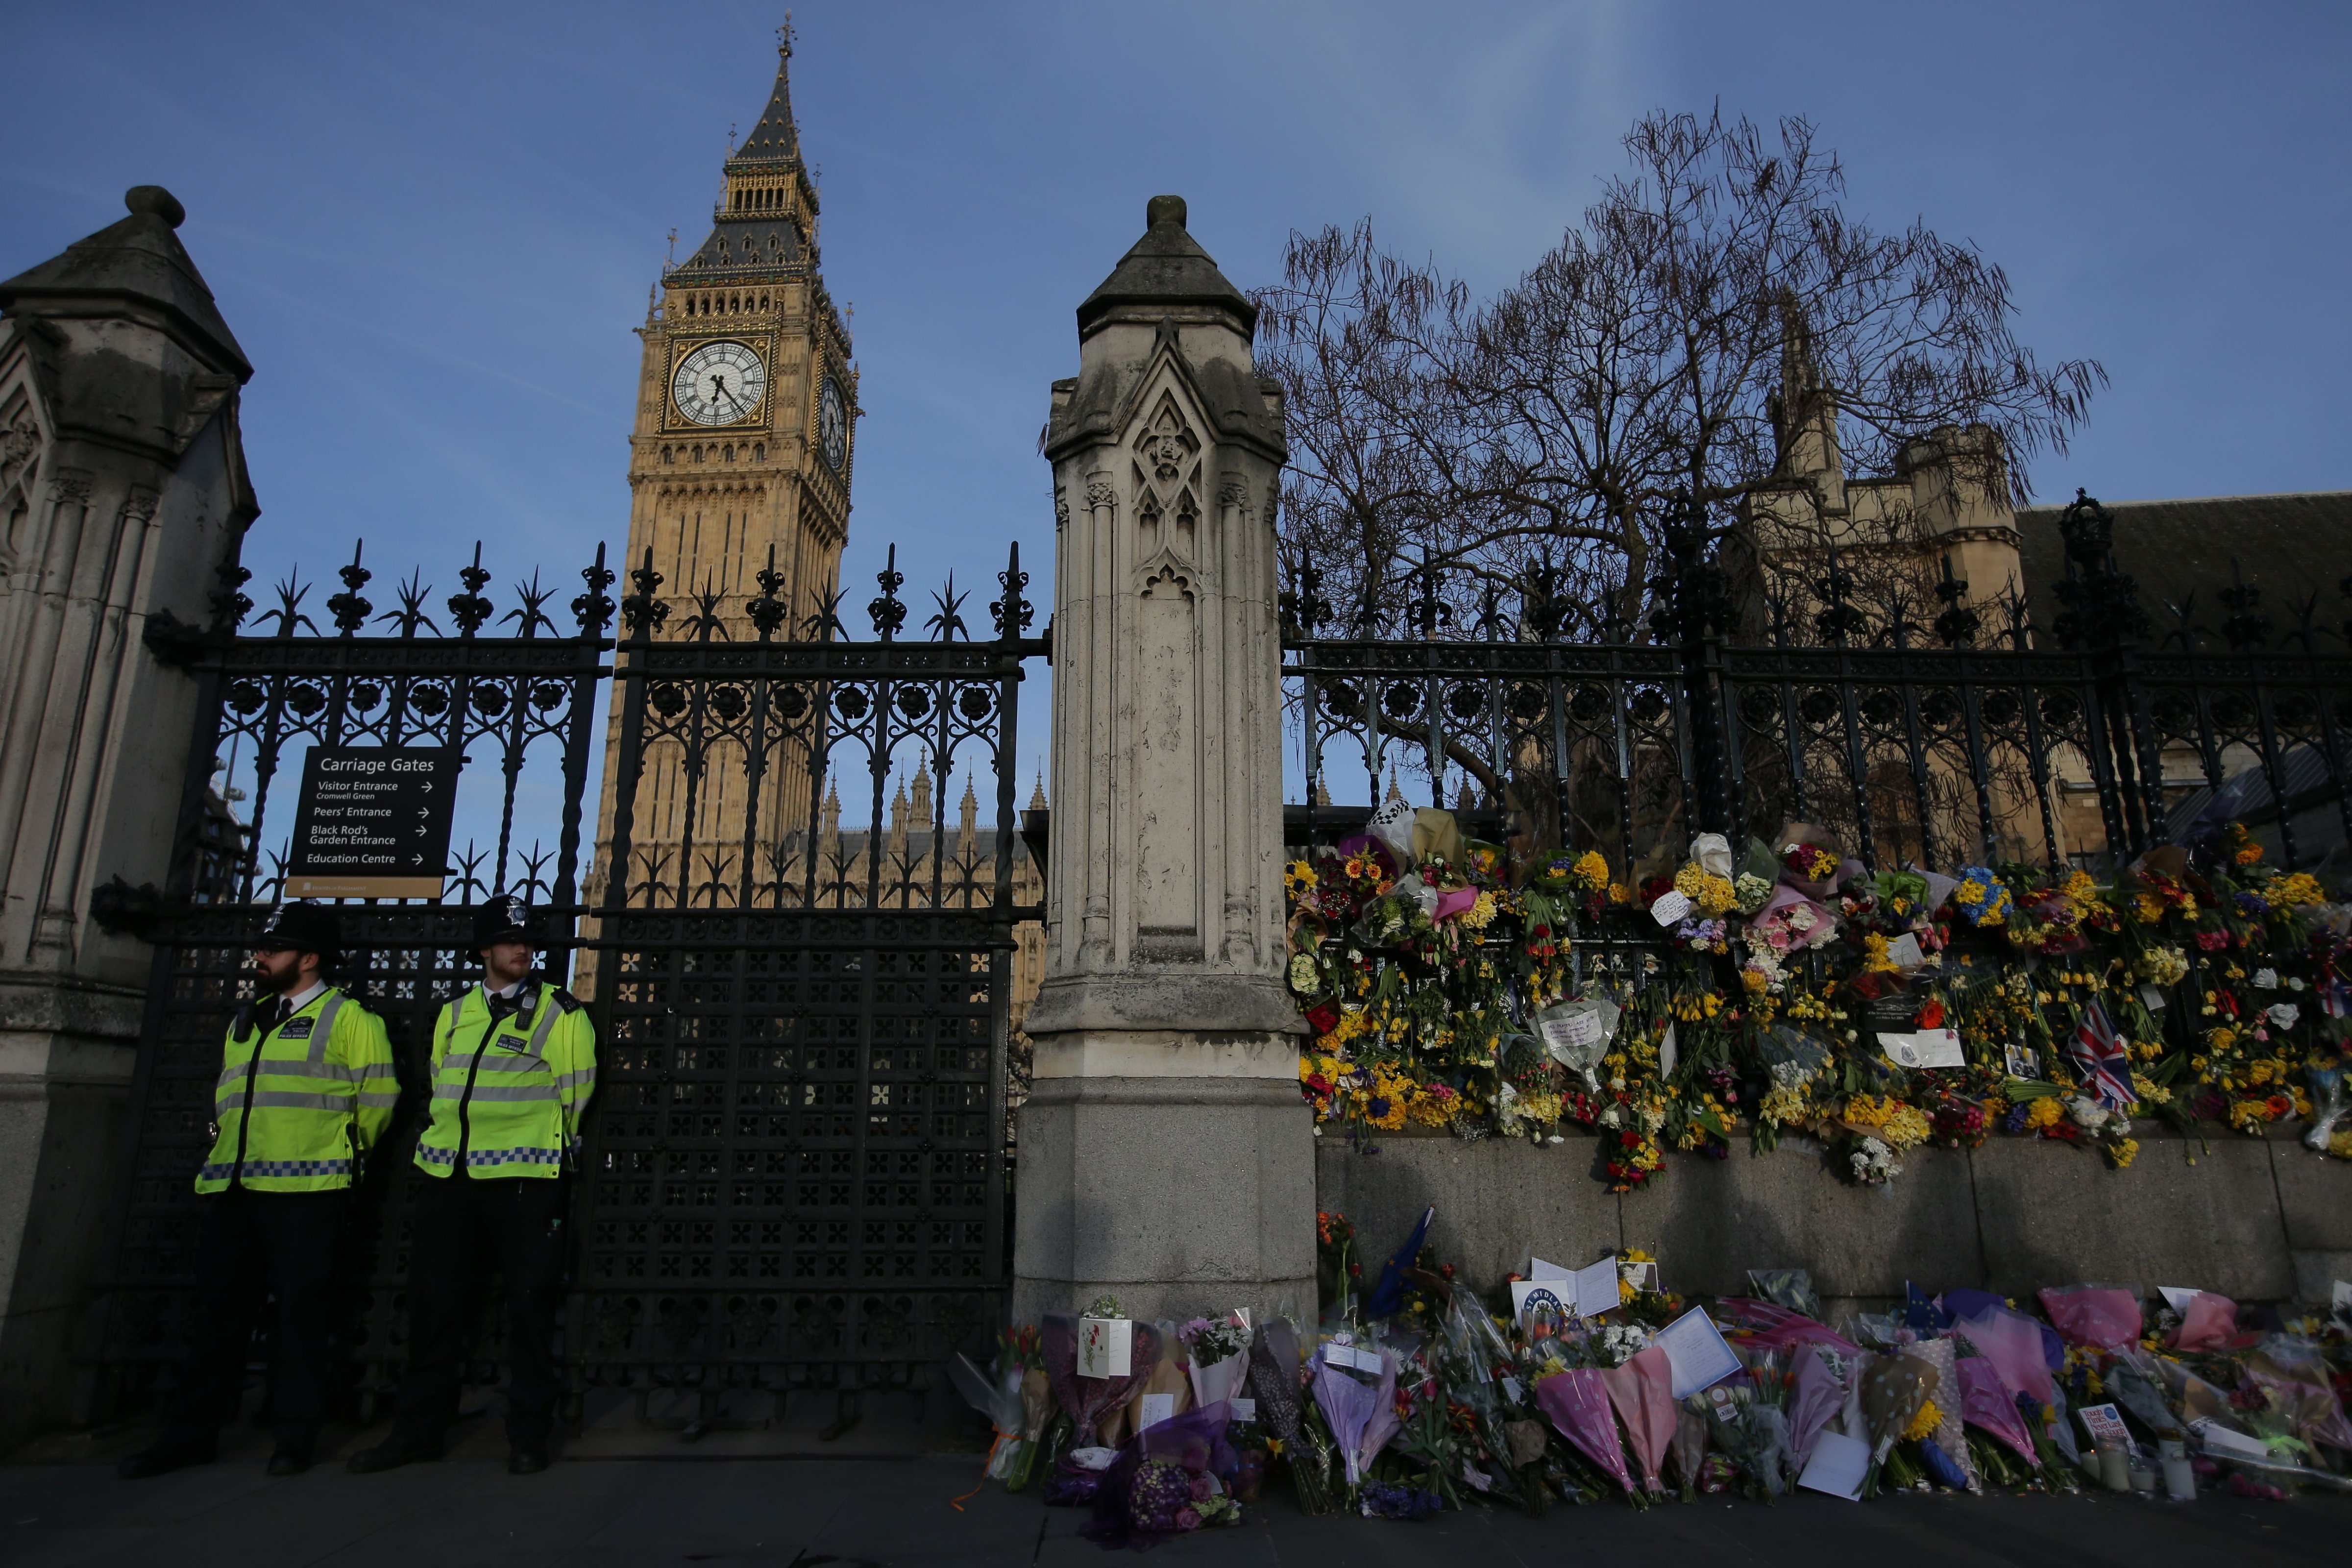 Police officers are seen with floral tributes to the victims of the March 22 terror attack in front of the Elizabeth Tower, more commonly referred to as 'Big Ben' in central London on March 26, 2017. (DANIEL LEAL-OLIVAS—AFP/Getty Images)